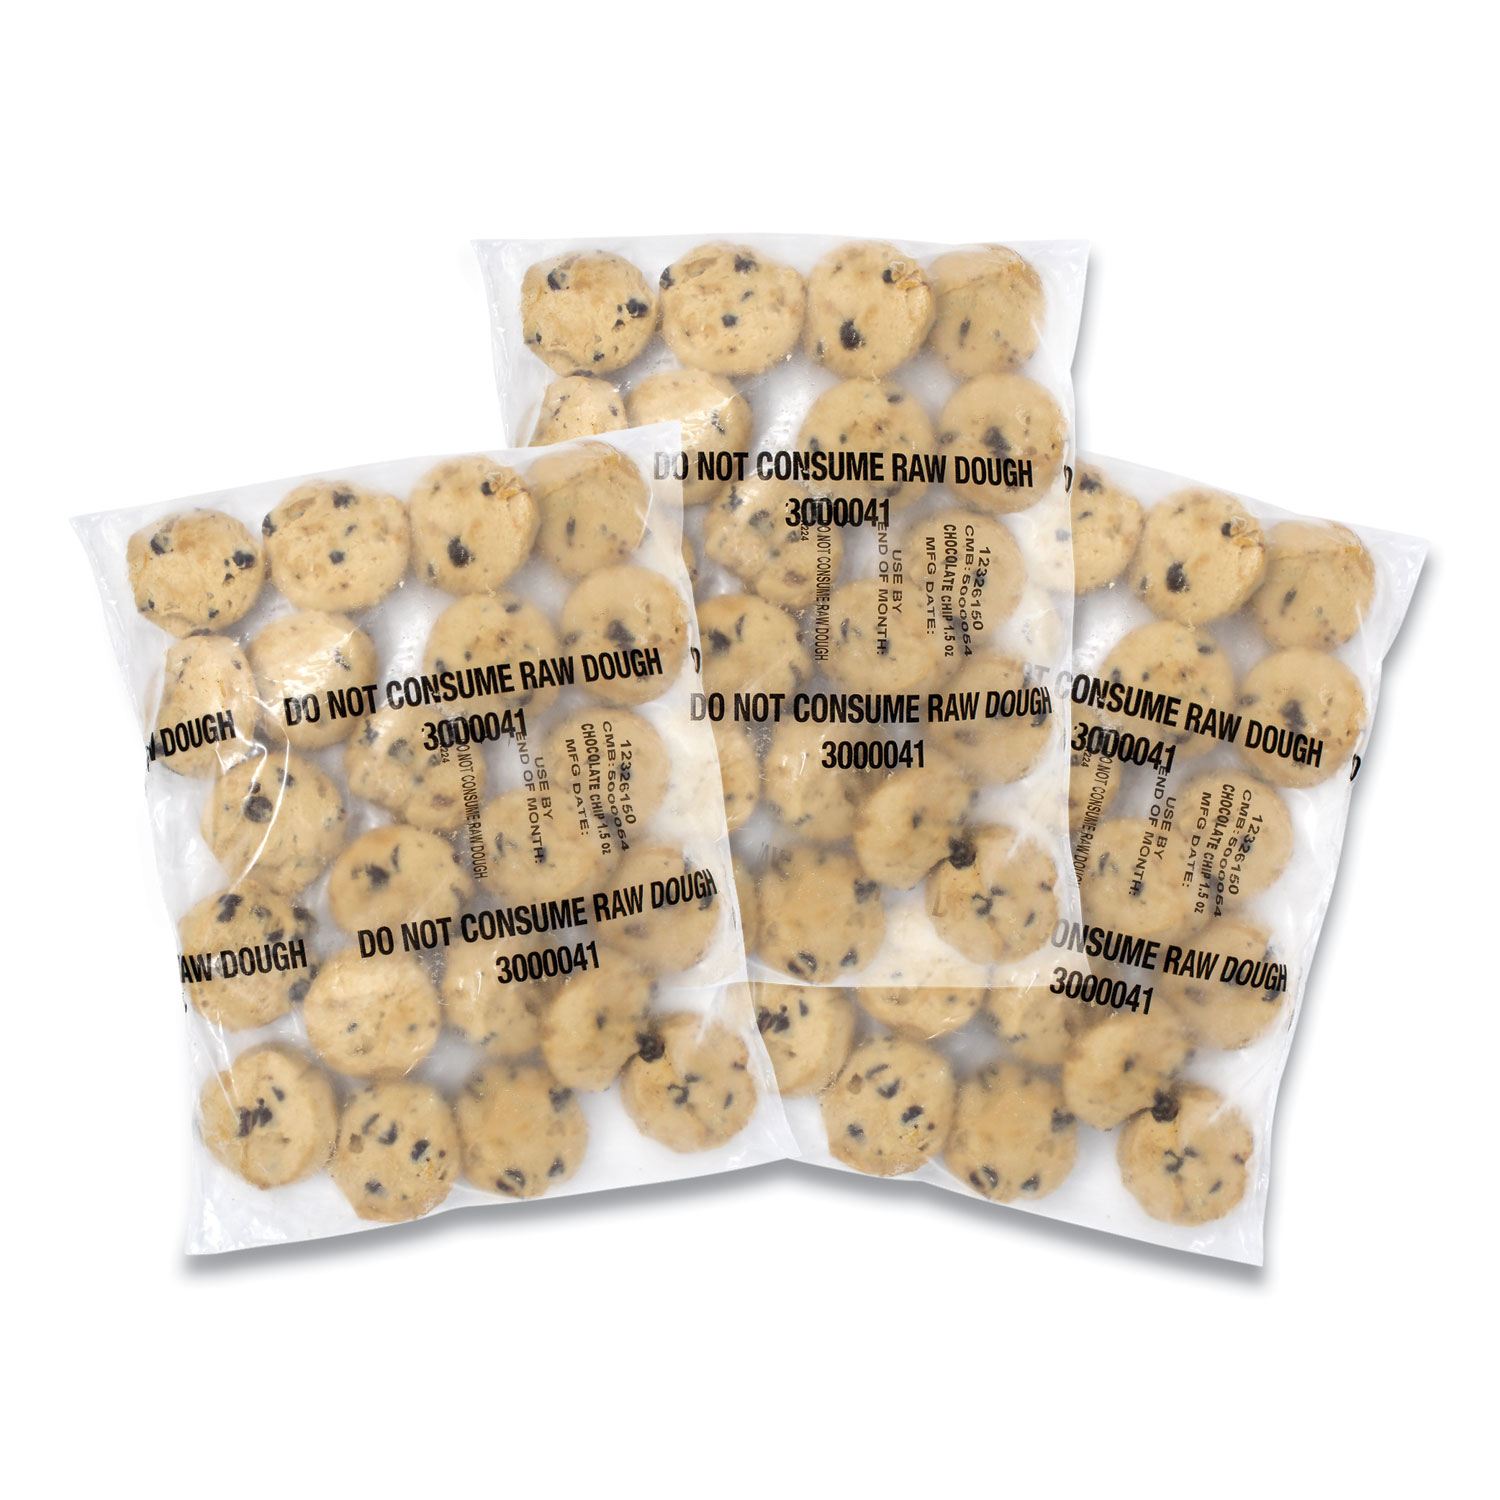  Toll House NES41529 Chocolate Chip Cookie Dough, 30 oz Bag, 3/Pack, Free Delivery in 1-4 Business Days (GRR90300187) 